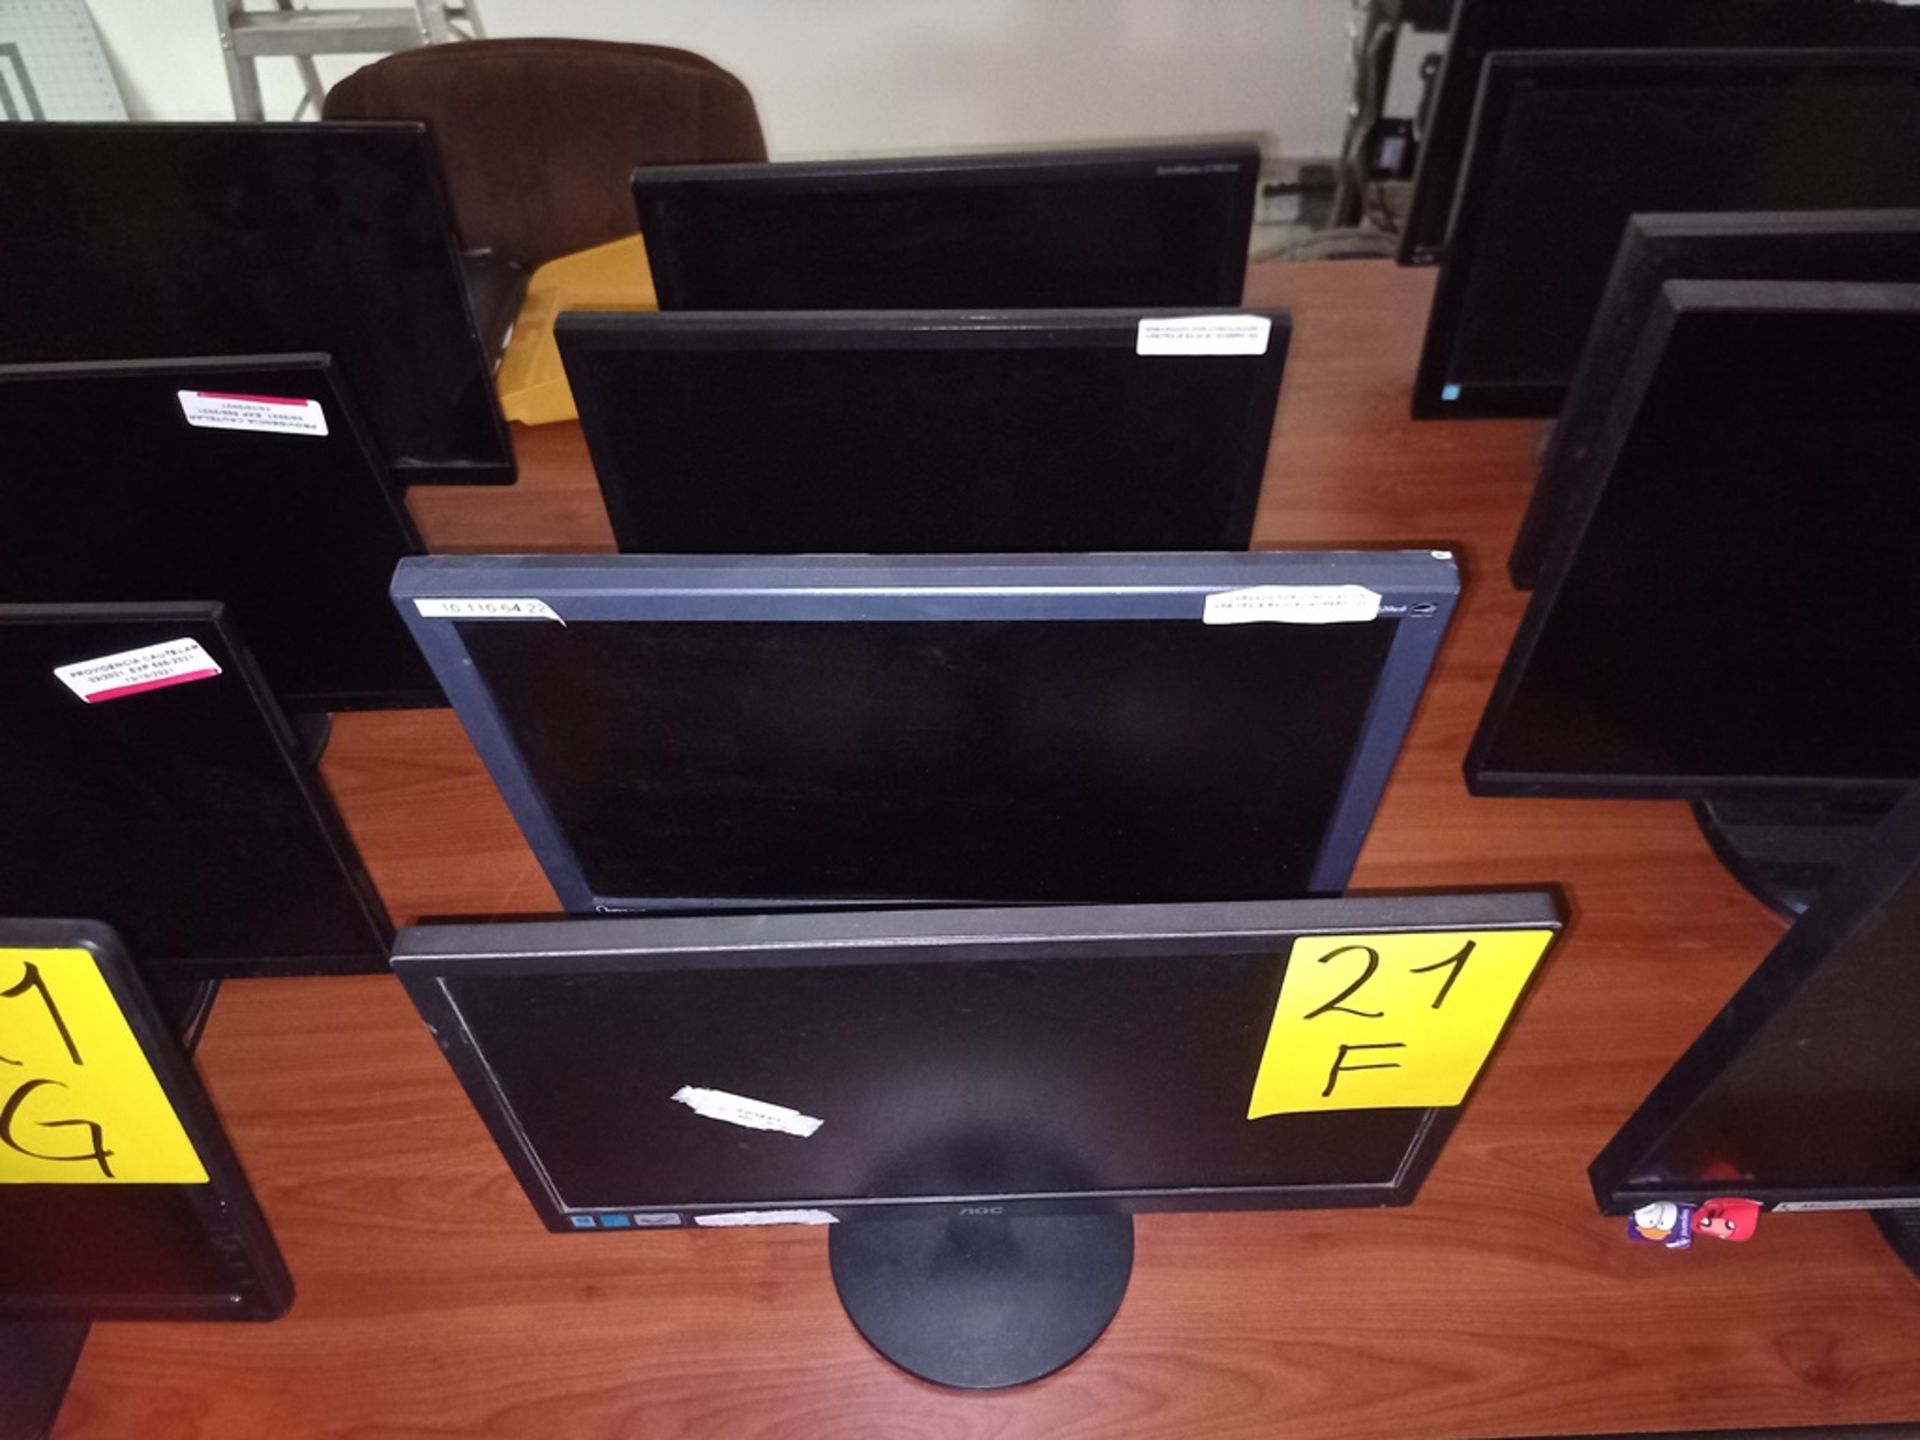 Lot of 6 Monitors contains: 6 Monitors of 17" brands Samsung, Acer, ADC, Dell. Please inspect.